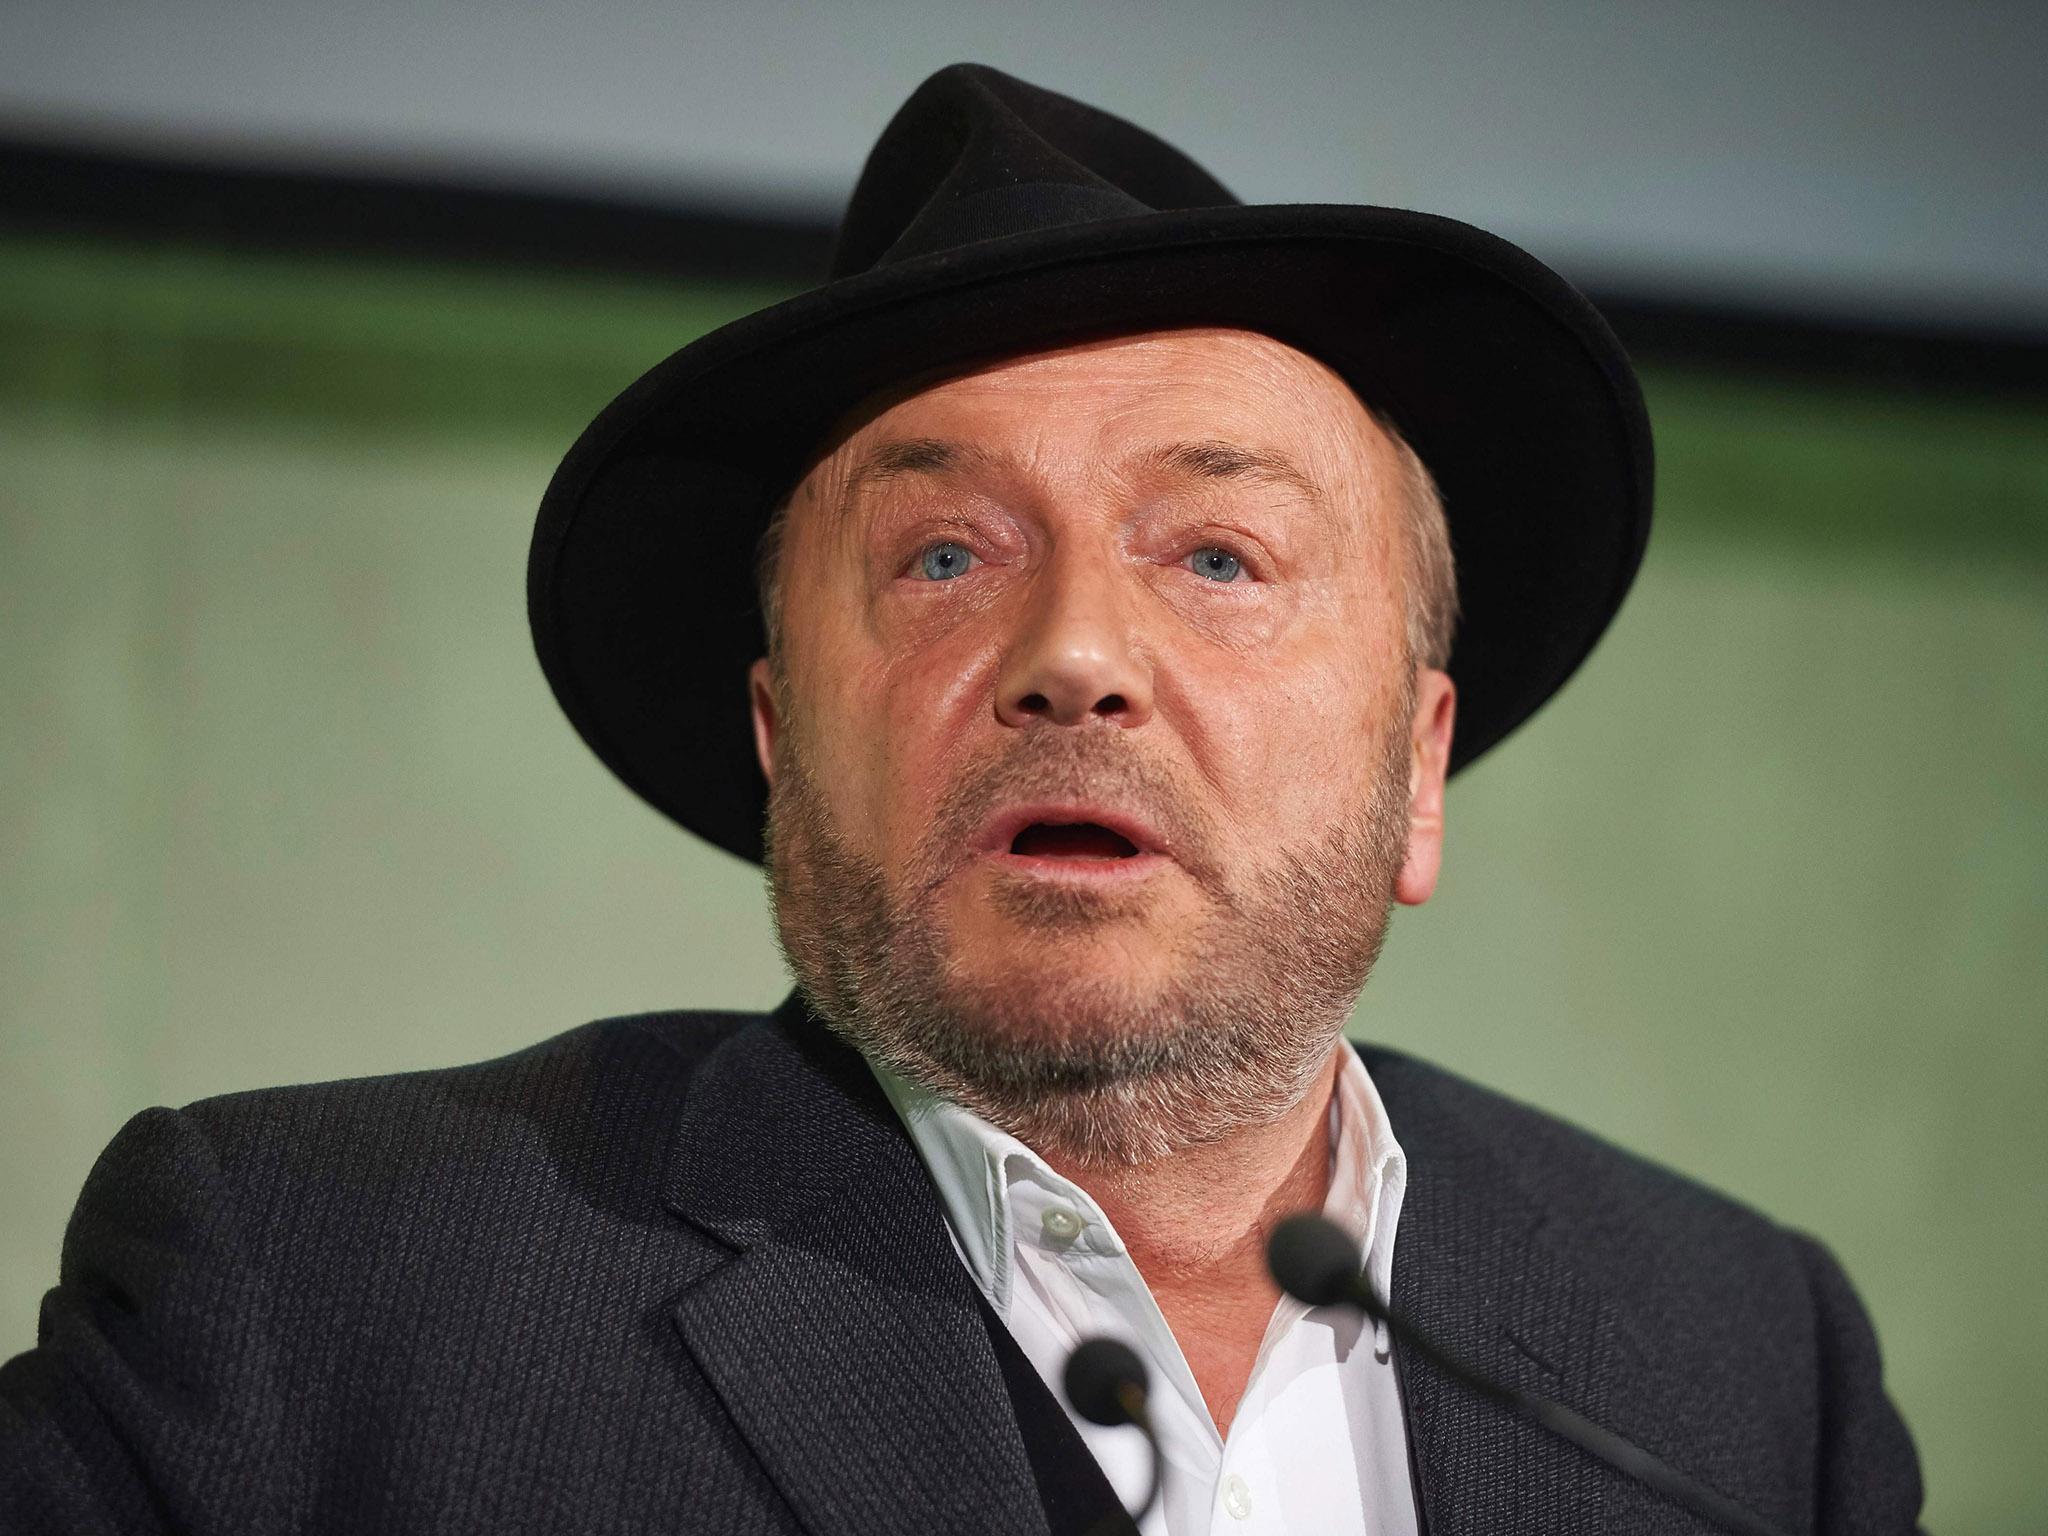 George Galloway talking to pro-Brexit campaigners in London earlier this year